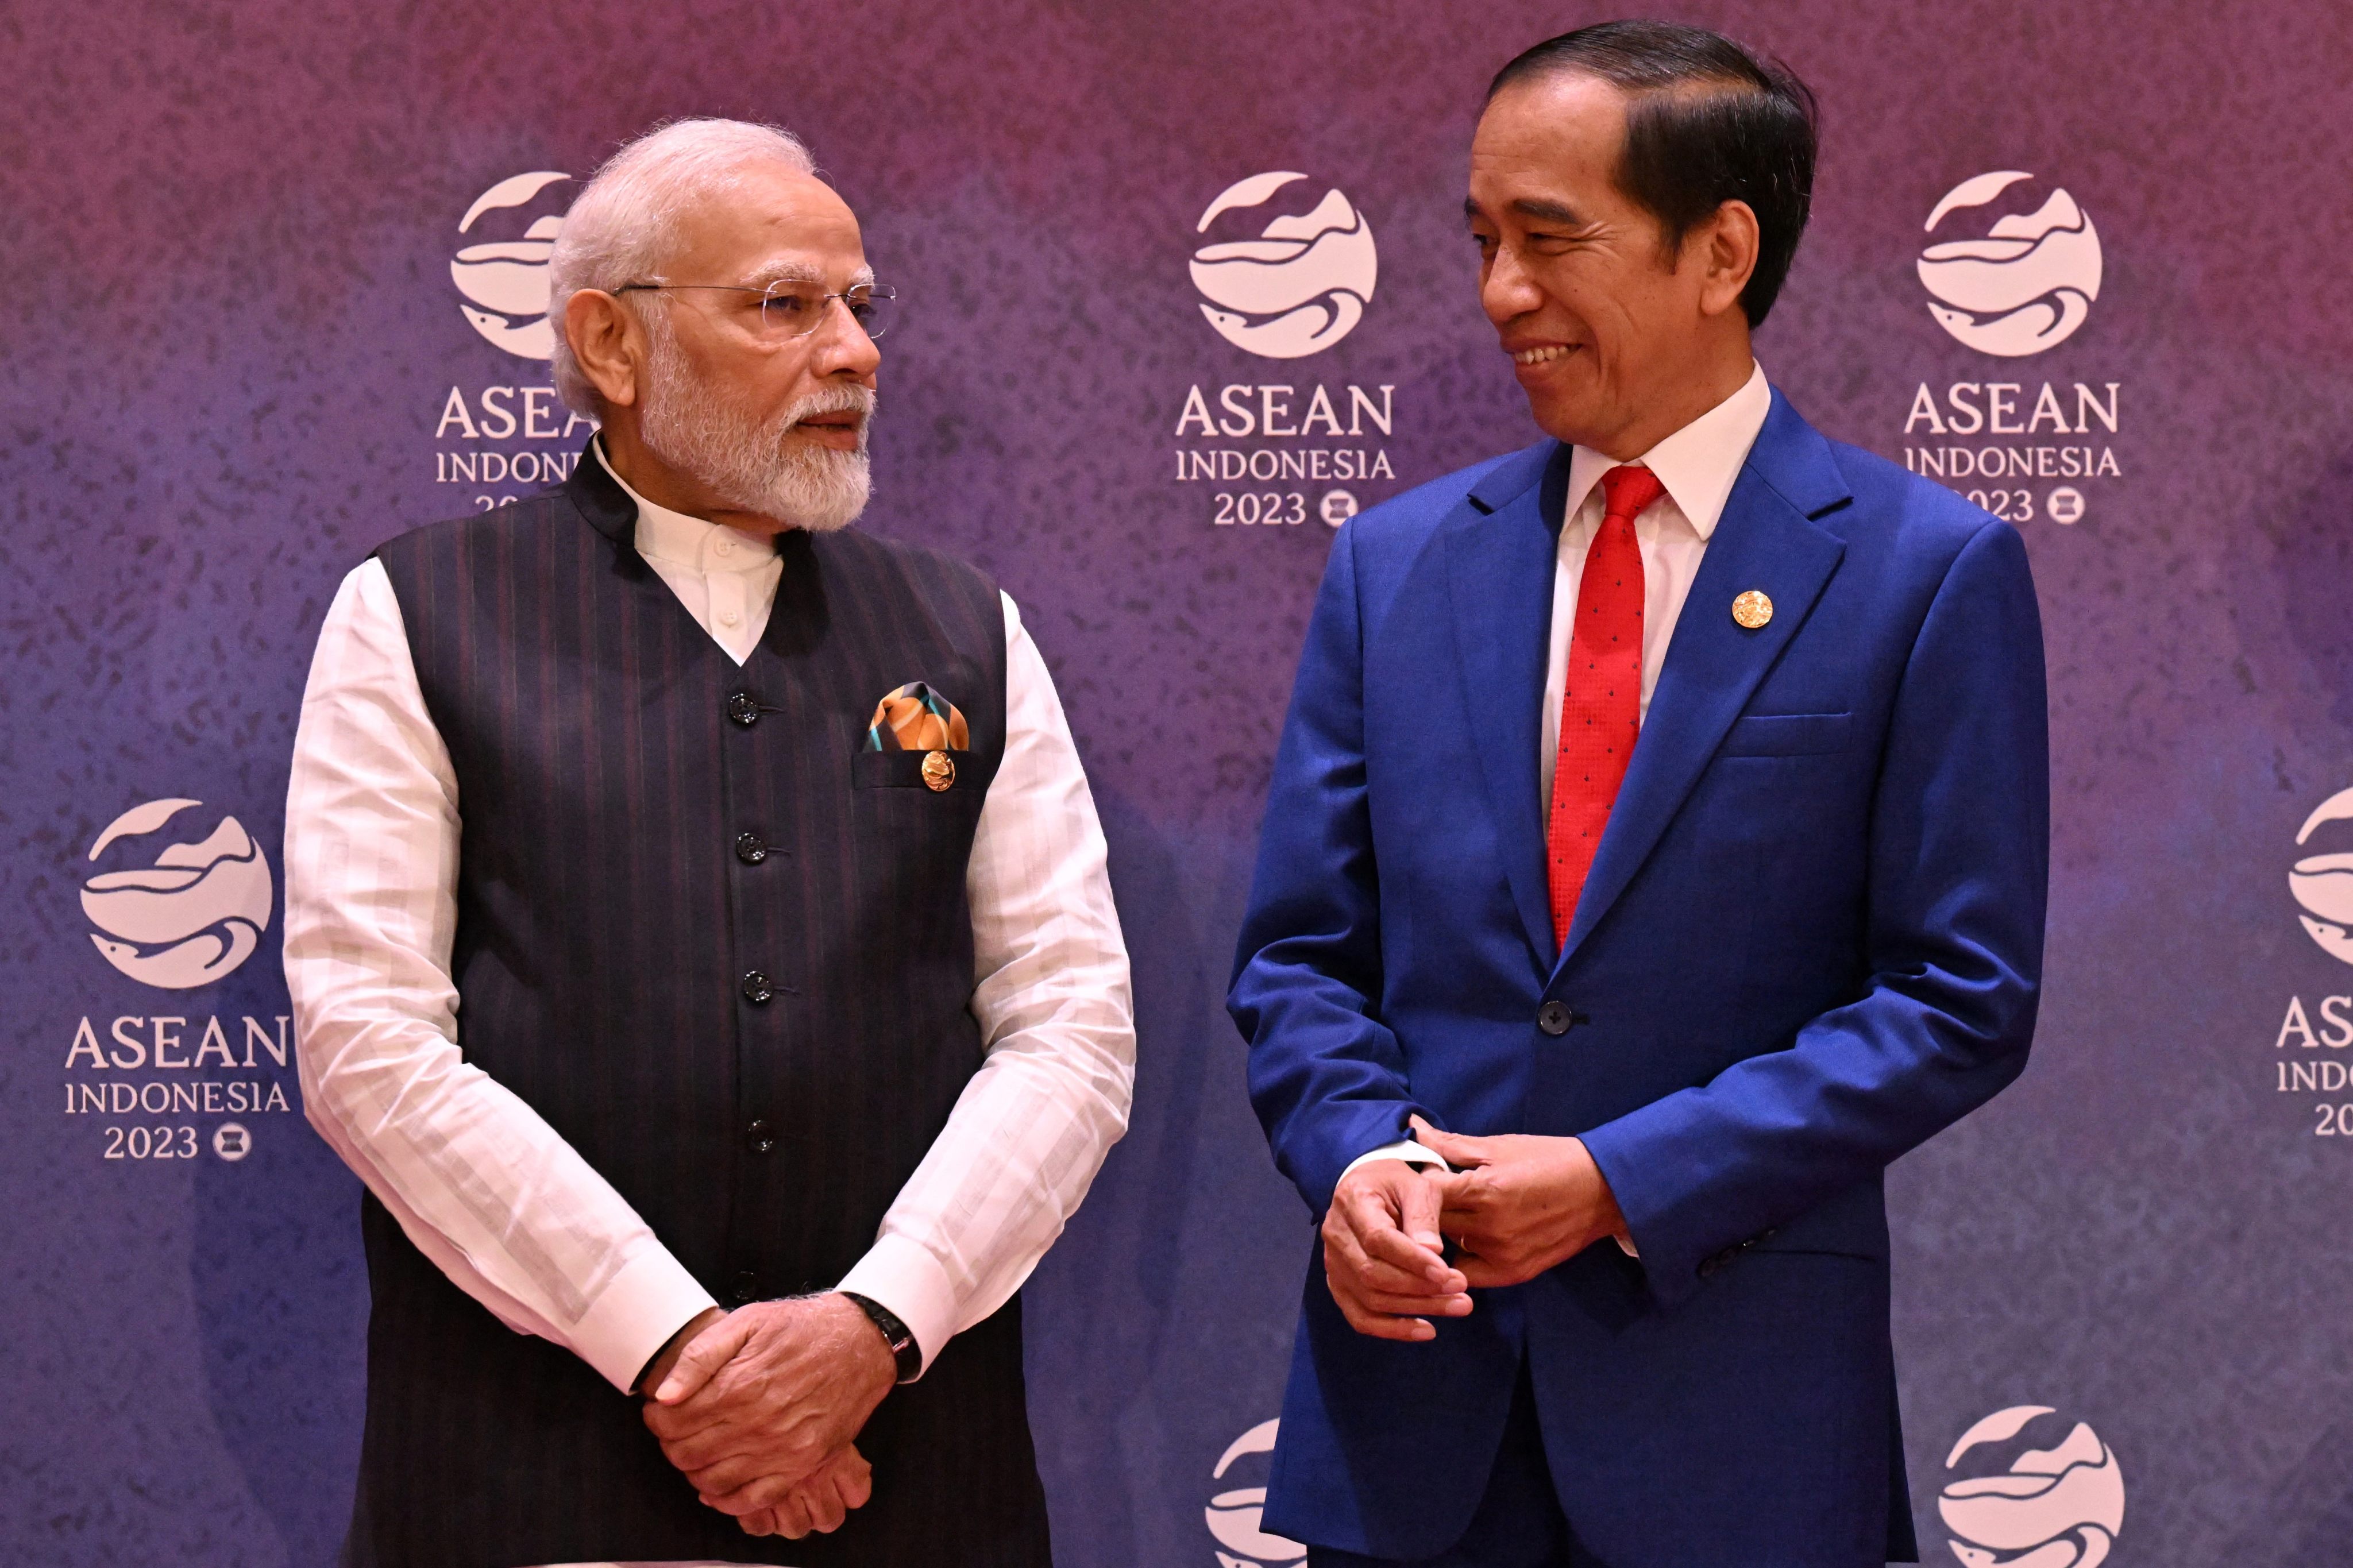 India’s Prime Minister Narendra Modi at the 20th Asean-India Summit in Jakarta last year. Photo: AFP